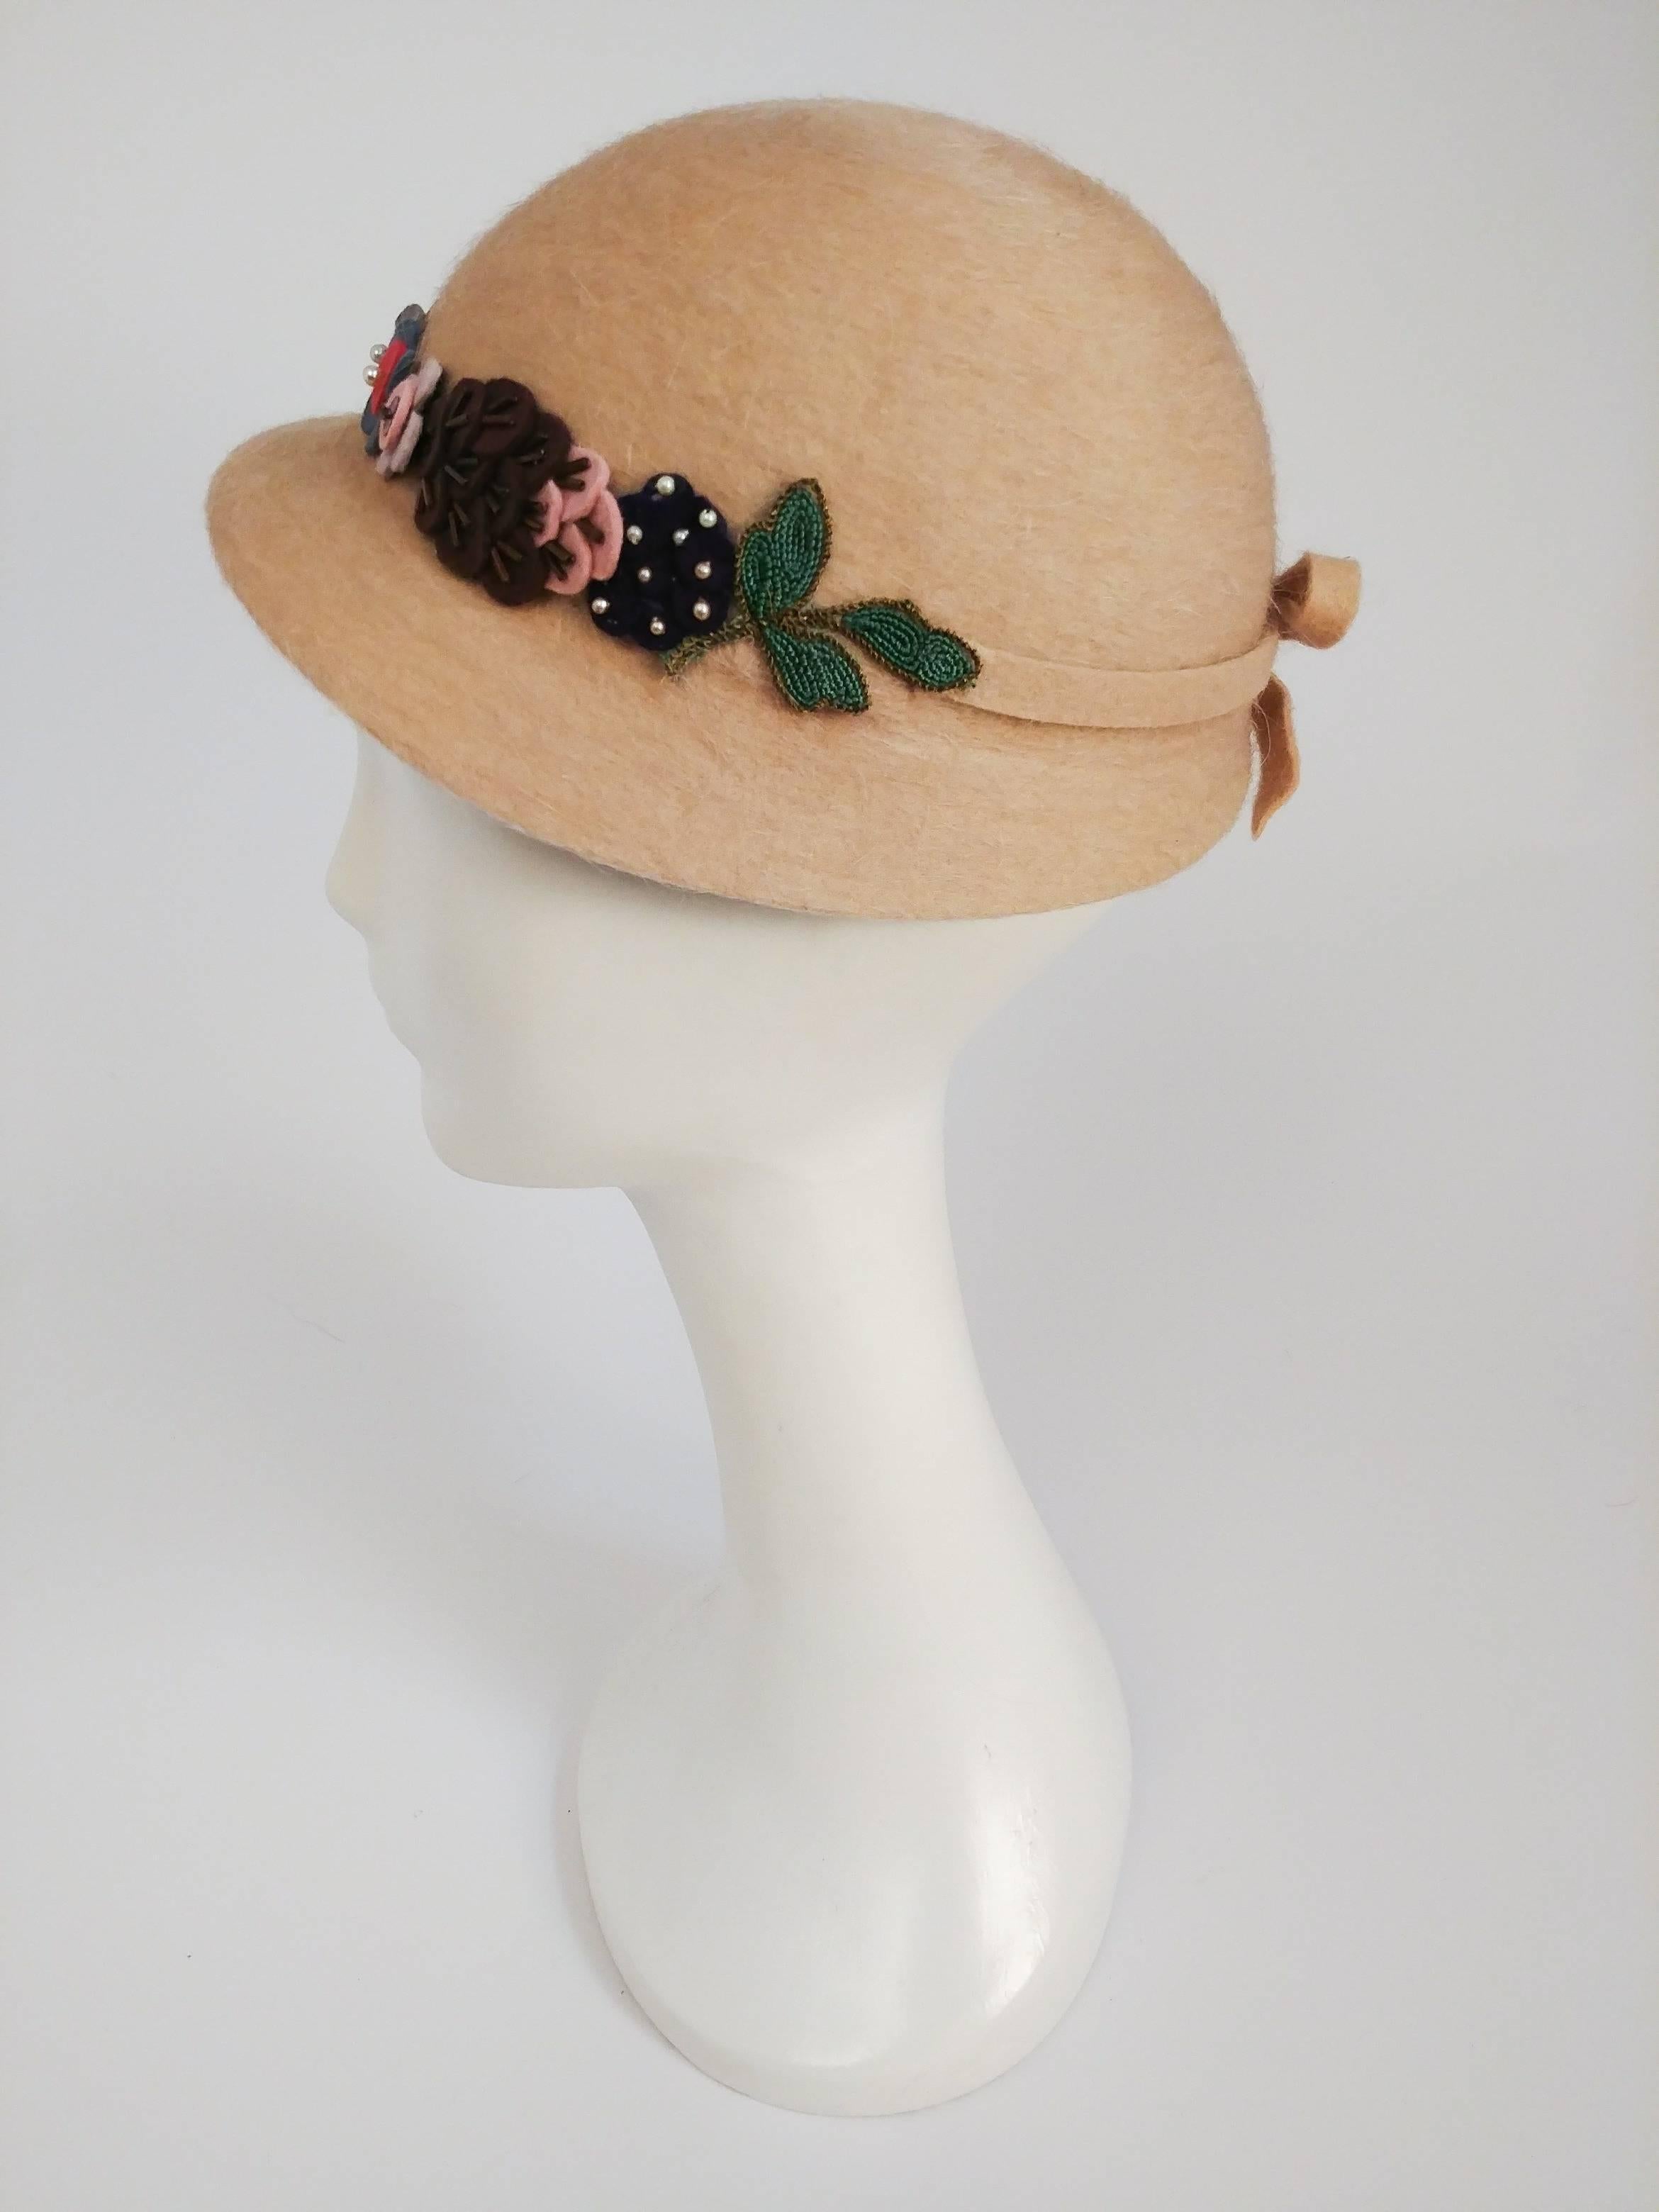 1930s Tan Cap w/ Wool Flowers. Adorable colorful flowers adorn the top band of cap. Elasticated band holds hat in place. 